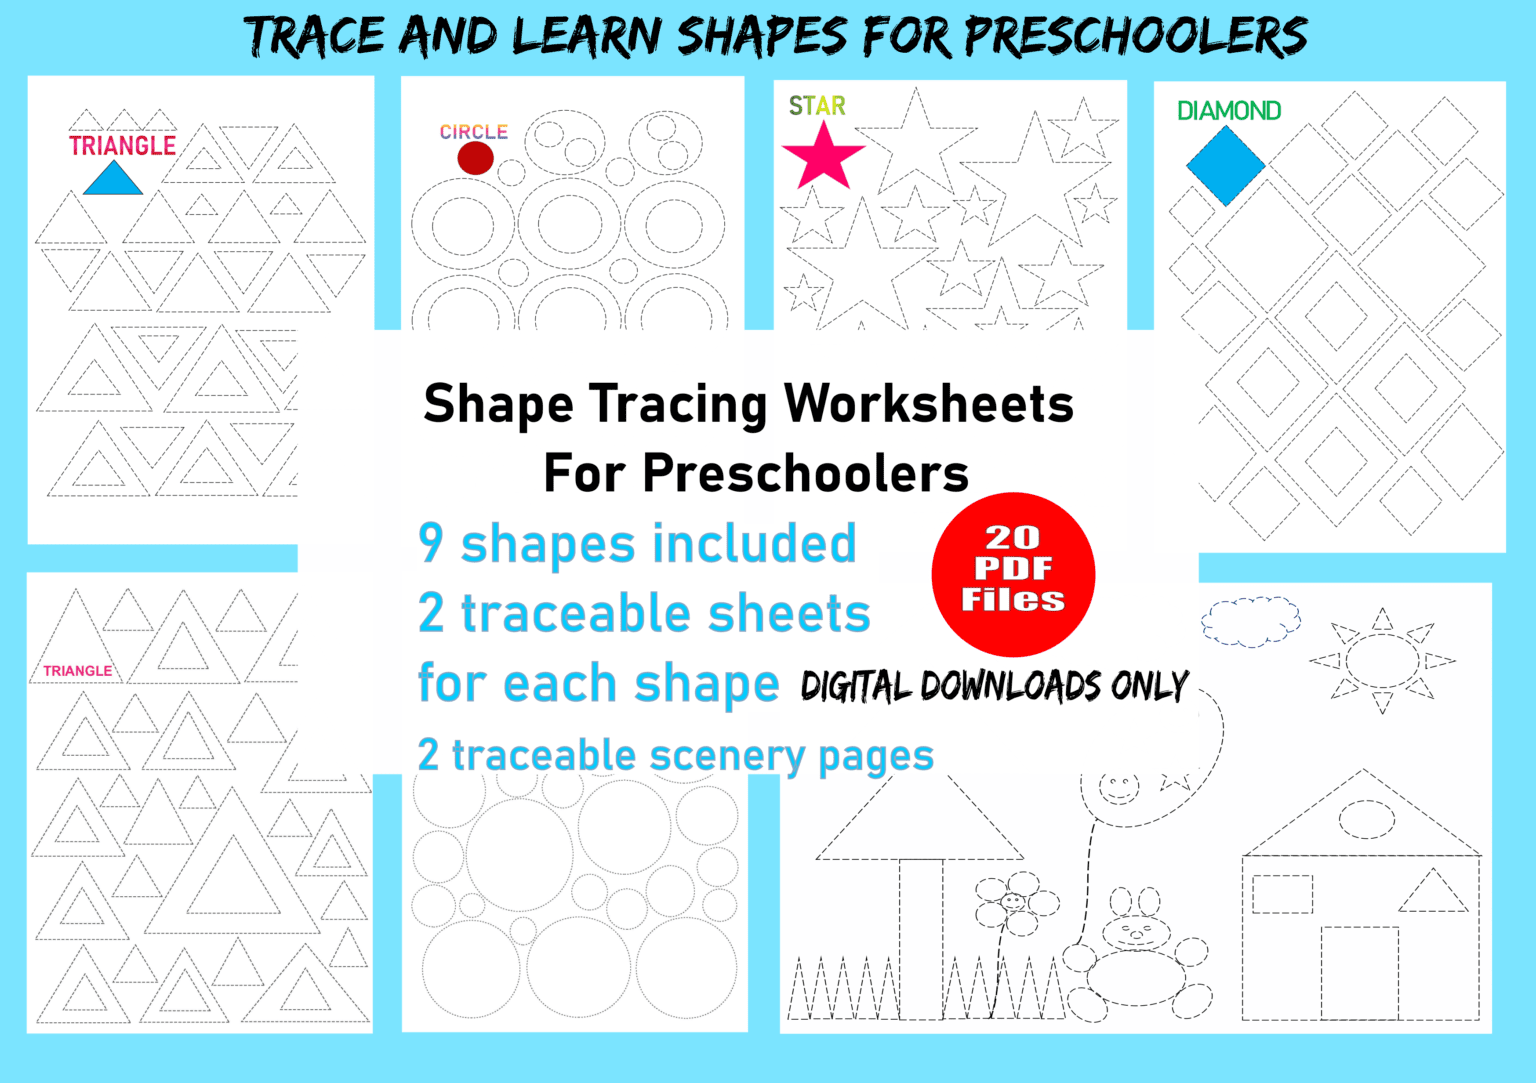 shapes-tracing-worksheets-pdf-packet-for-preschool-tracing-shapes